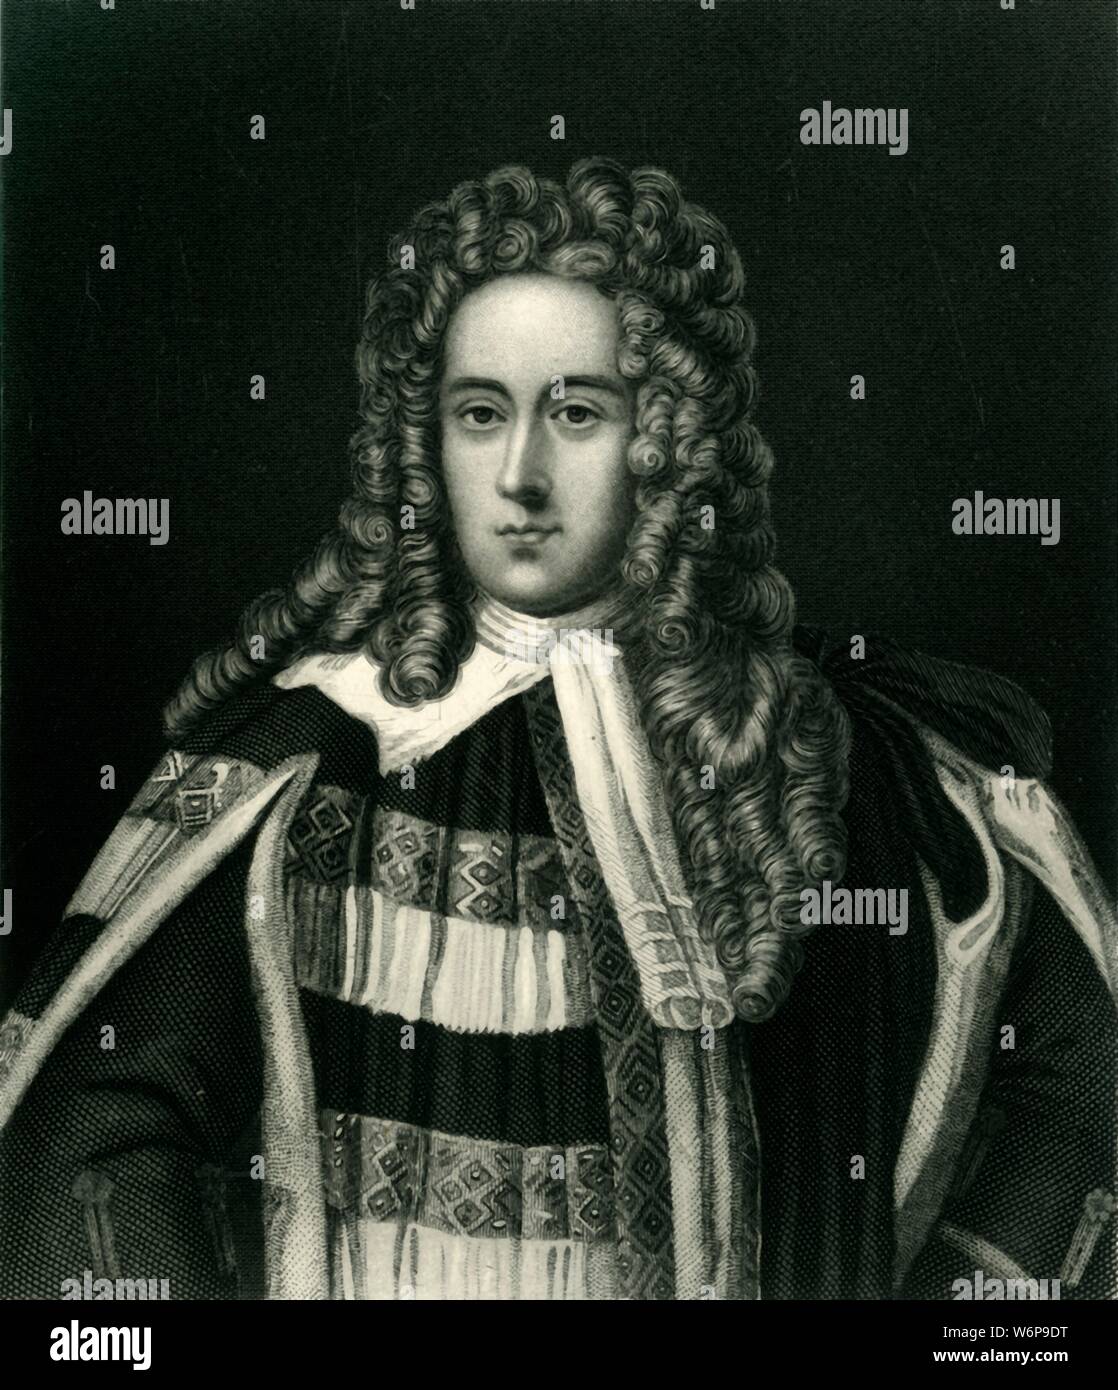 'Henry St. John, Viscount Bolingbroke', c1710, (c1884). Henry St John, 1st Viscount Bolingbroke (1678-1751), English politician, government official during reign of Queen Anne, political philosopher and leader of the Tories who supported the Jacobite rebellion of 1715. From &quot;Leaders of the Senate: A Biographical History of the Rise and Development of the British Constitution, Vol. I.&quot;, by Alexander Charles Ewald, F.S.A. [William Mackenzie, London, Edinburgh &amp; Berlin] Stock Photo